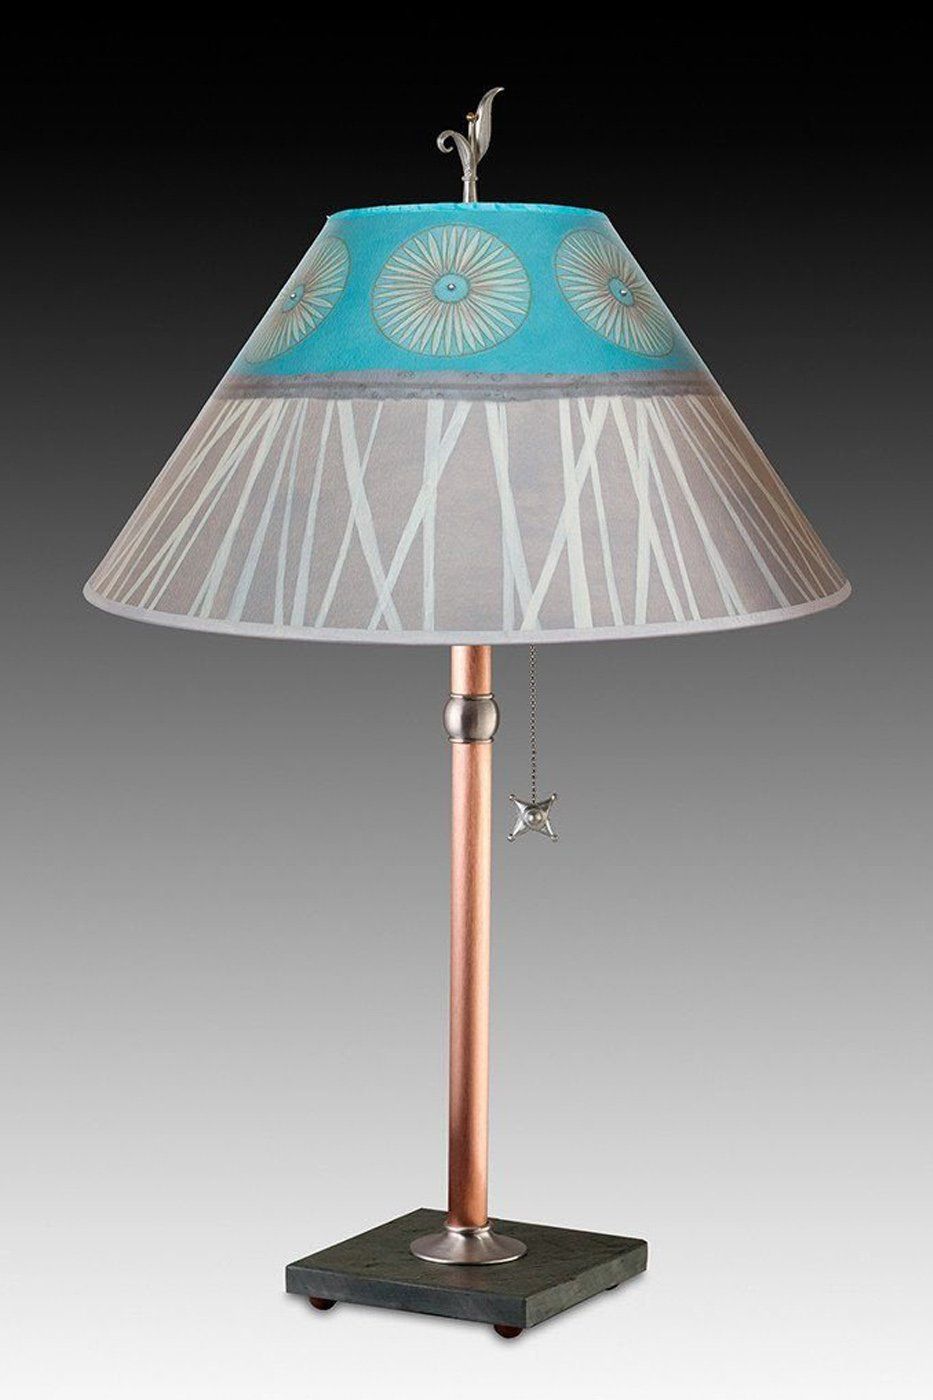 Janna Ugone & Co Table Lamps Copper Table Lamp with Large Conical Shade in Pool